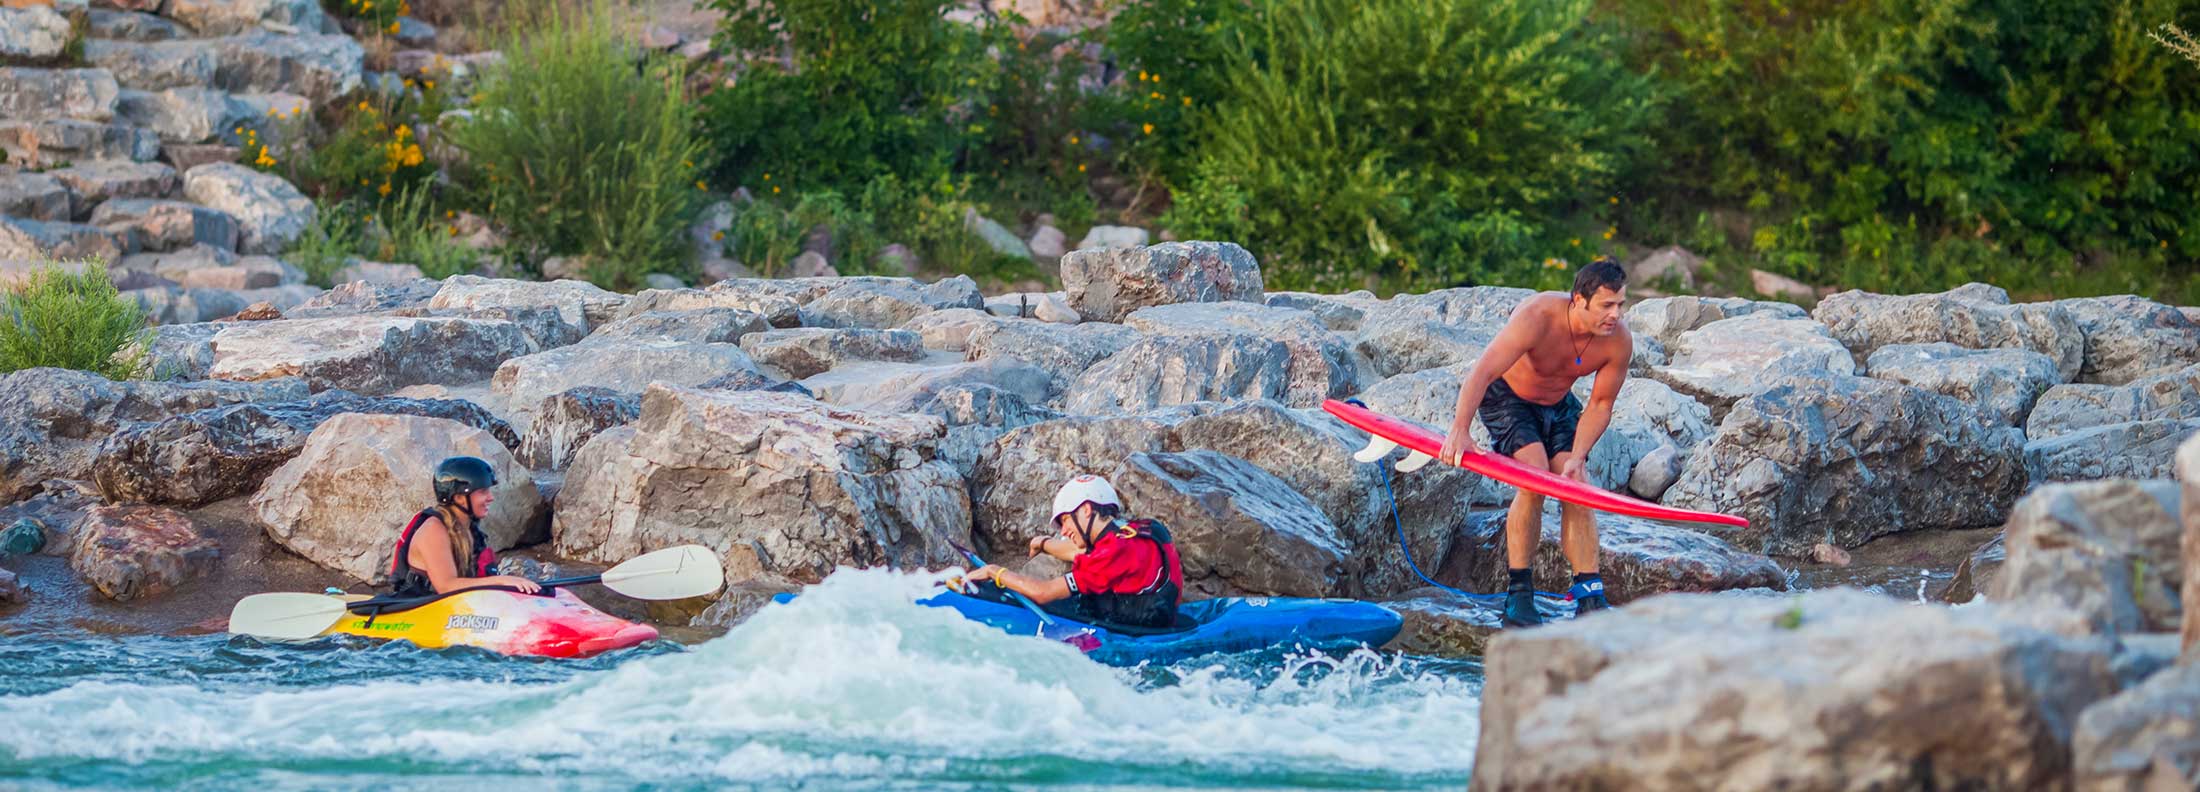 6 Outdoor Adventures to Try This Summer in Missoula